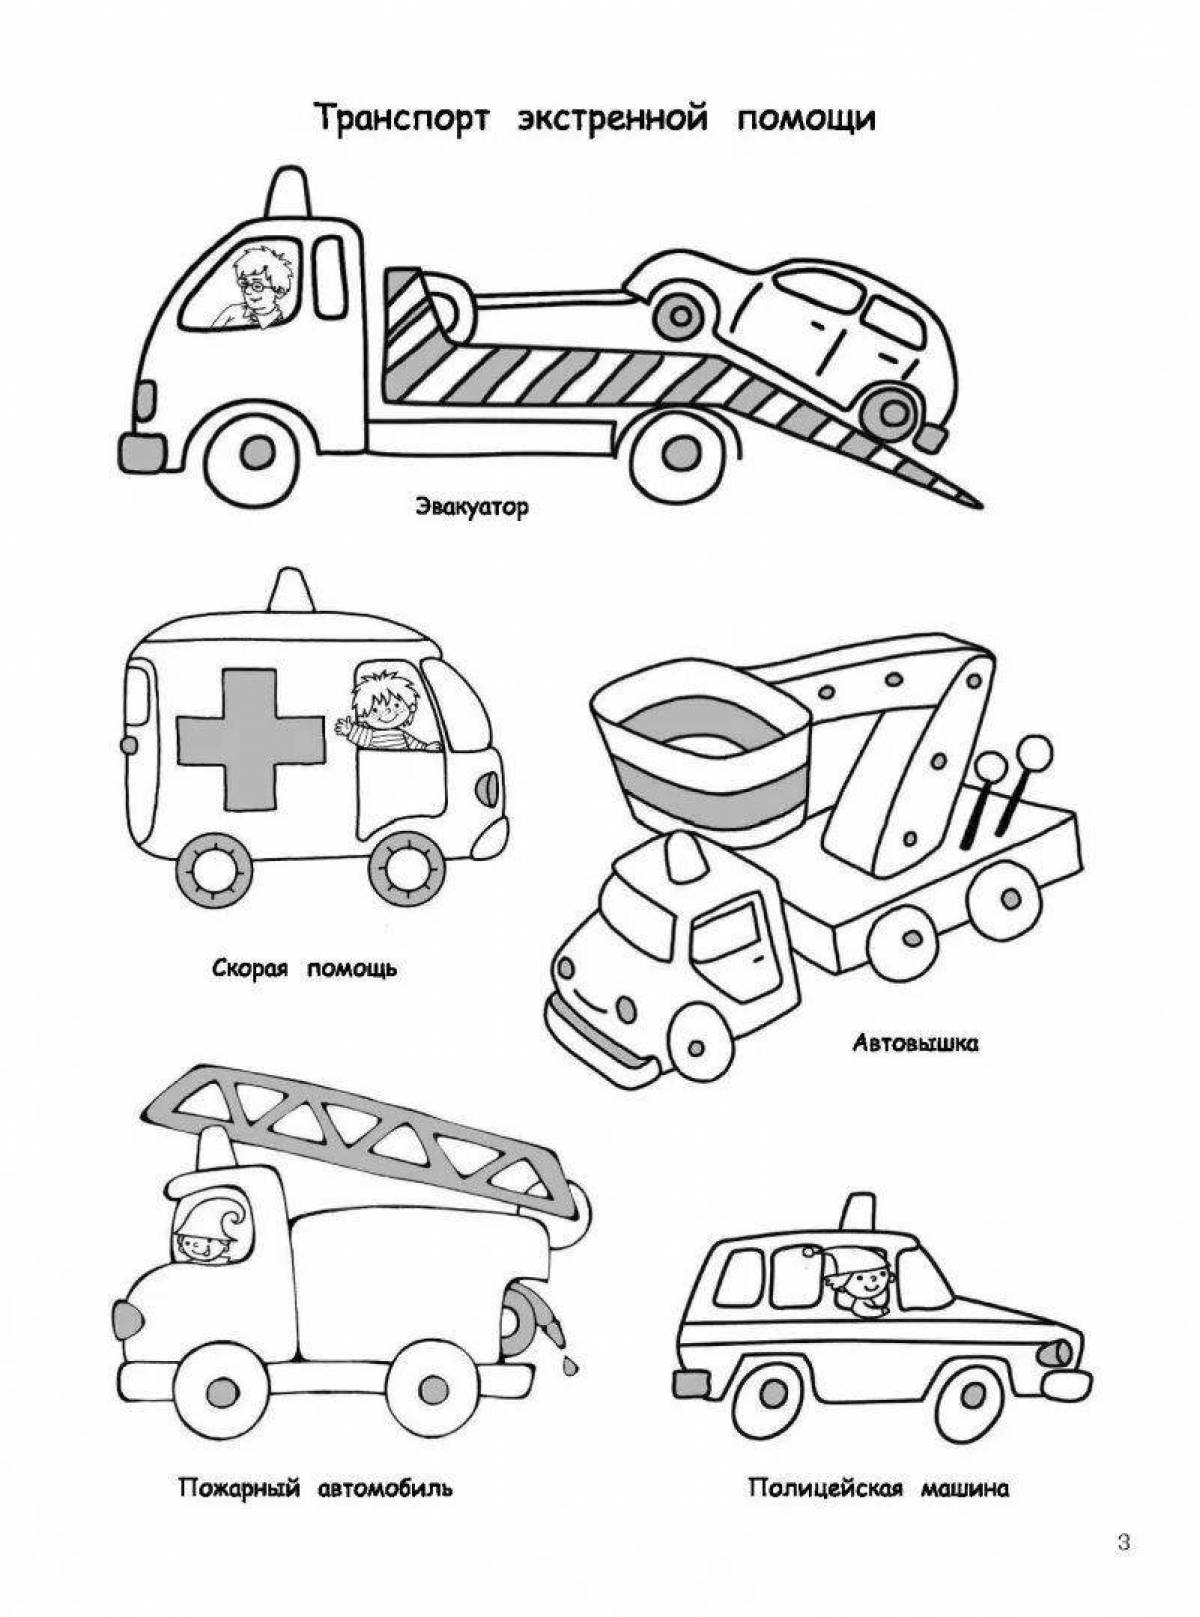 A playful special transport coloring page for 6-7 year olds